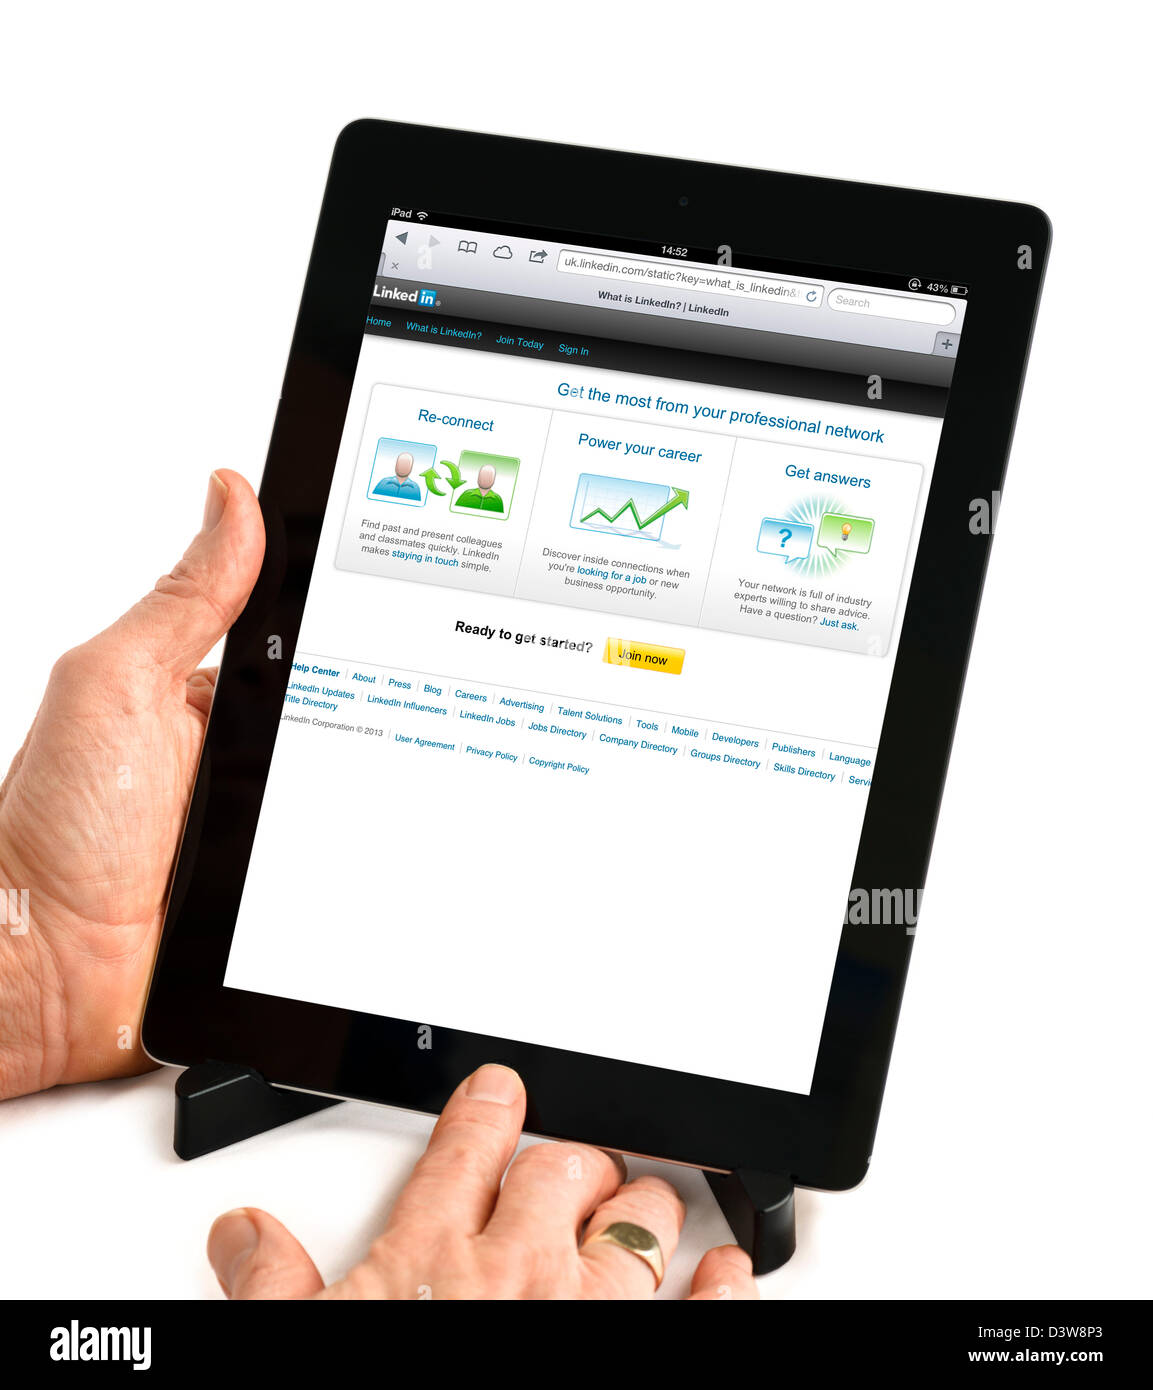 The professional social networking site LinkedIn viewed on a 4th generation iPad Stock Photo